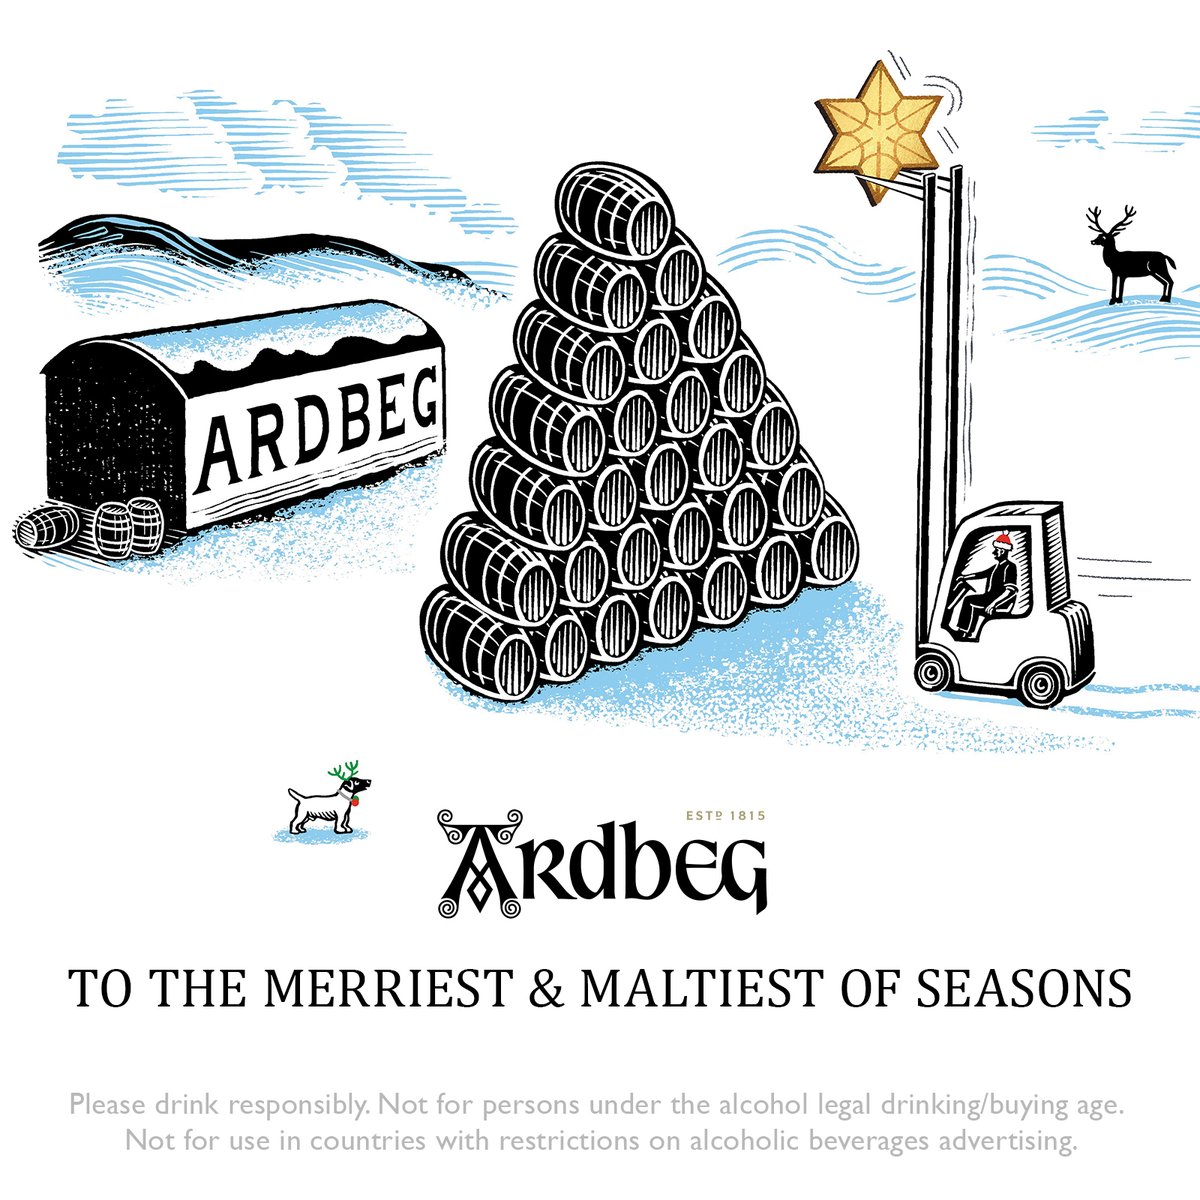 Here’s to the malt on the top of everyone’s wishlist this festive season. Happy holidays from everybody here at the Ardbeg Distillery! #Ardbeg #DrinkResponsibly